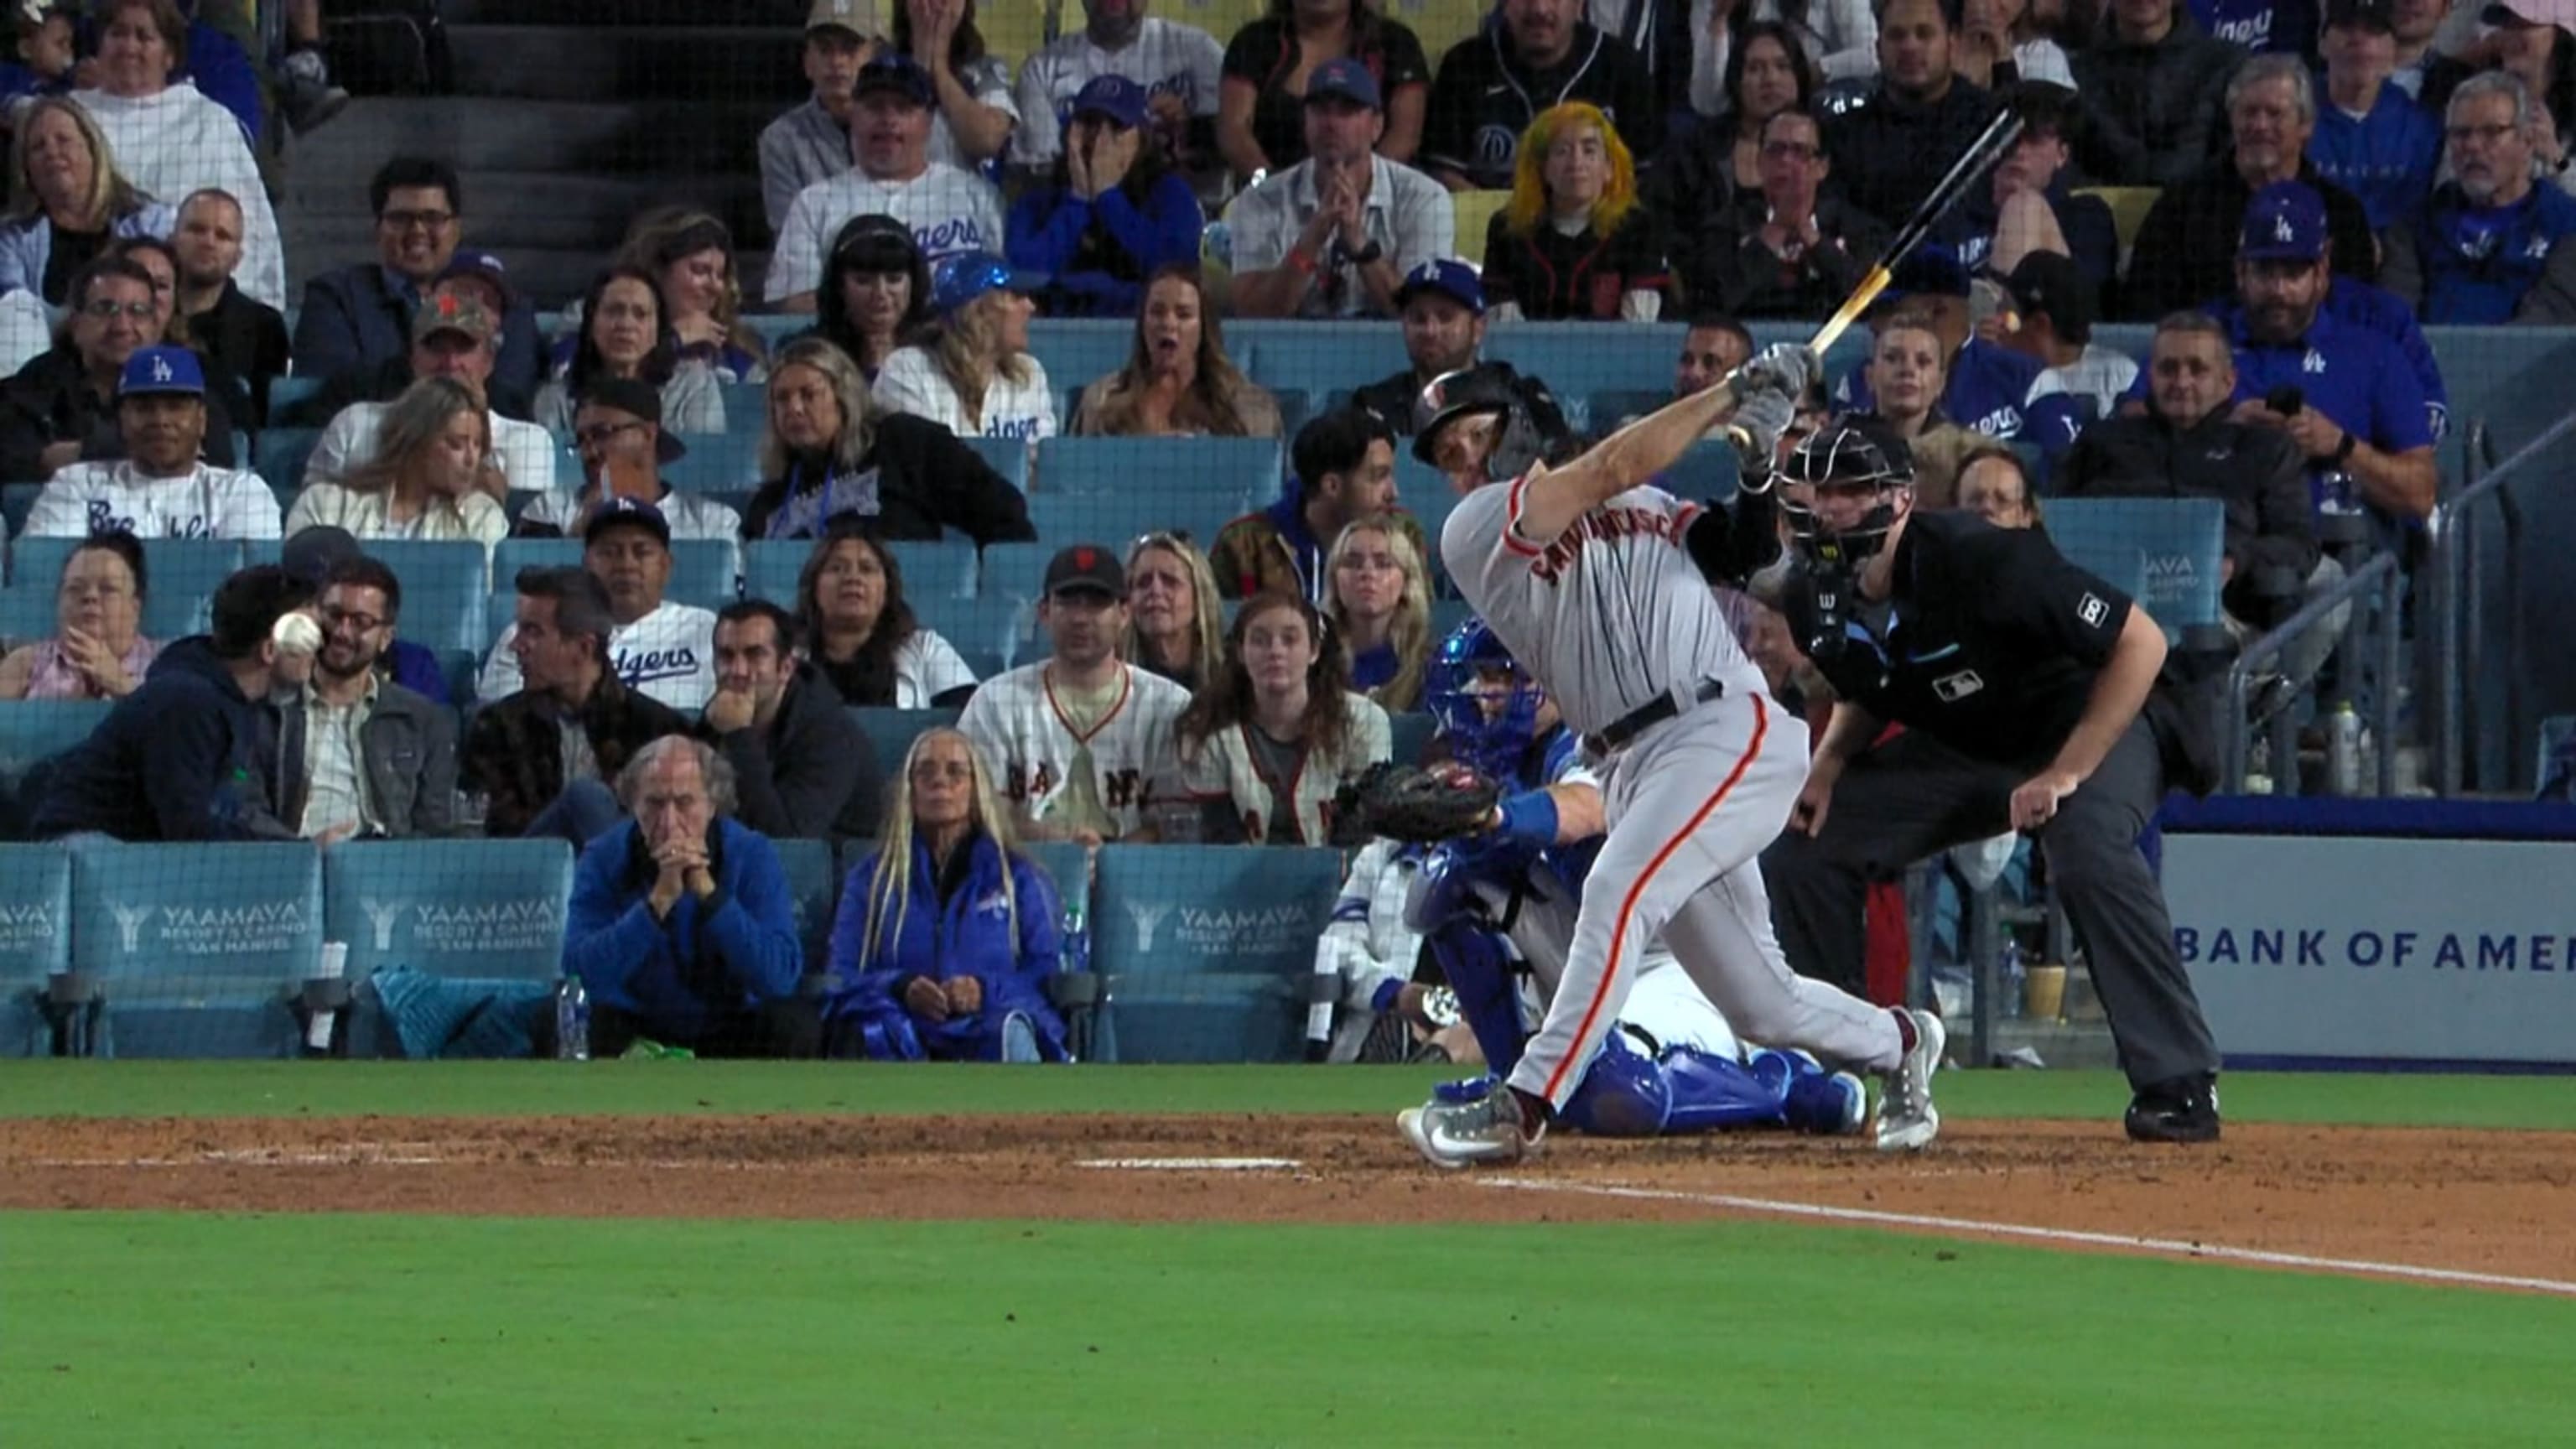 Giants rally to beat Dodgers in 11th after being hitless for 6 innings